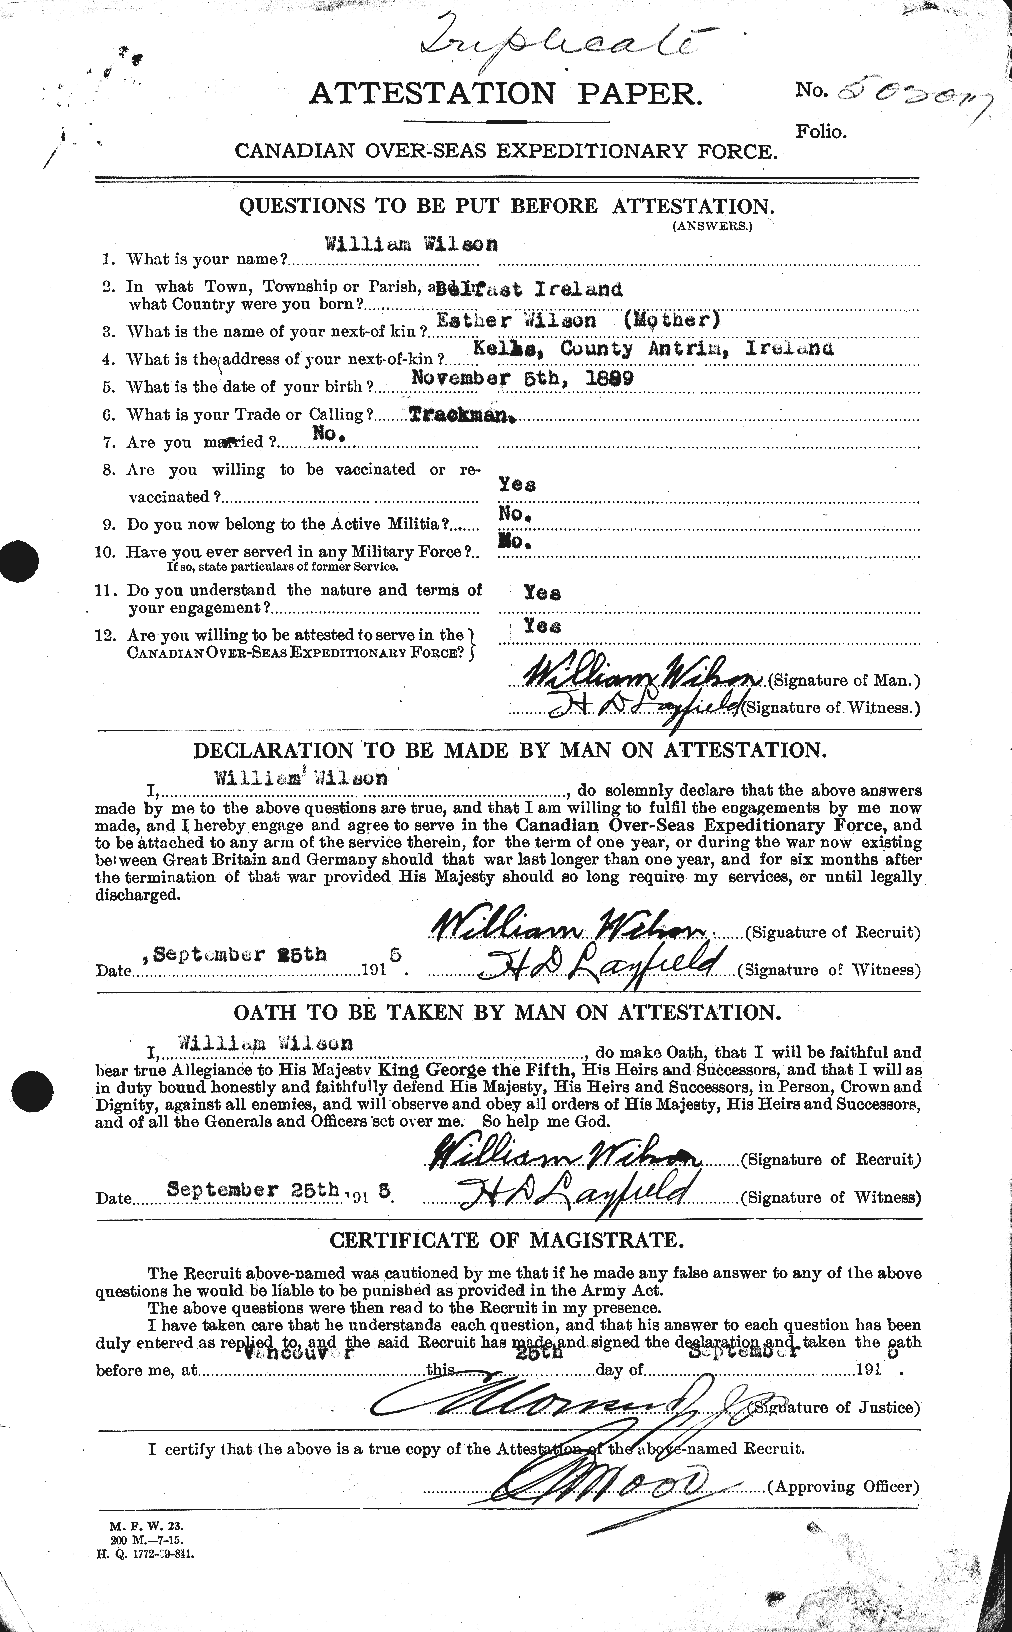 Personnel Records of the First World War - CEF 681895a